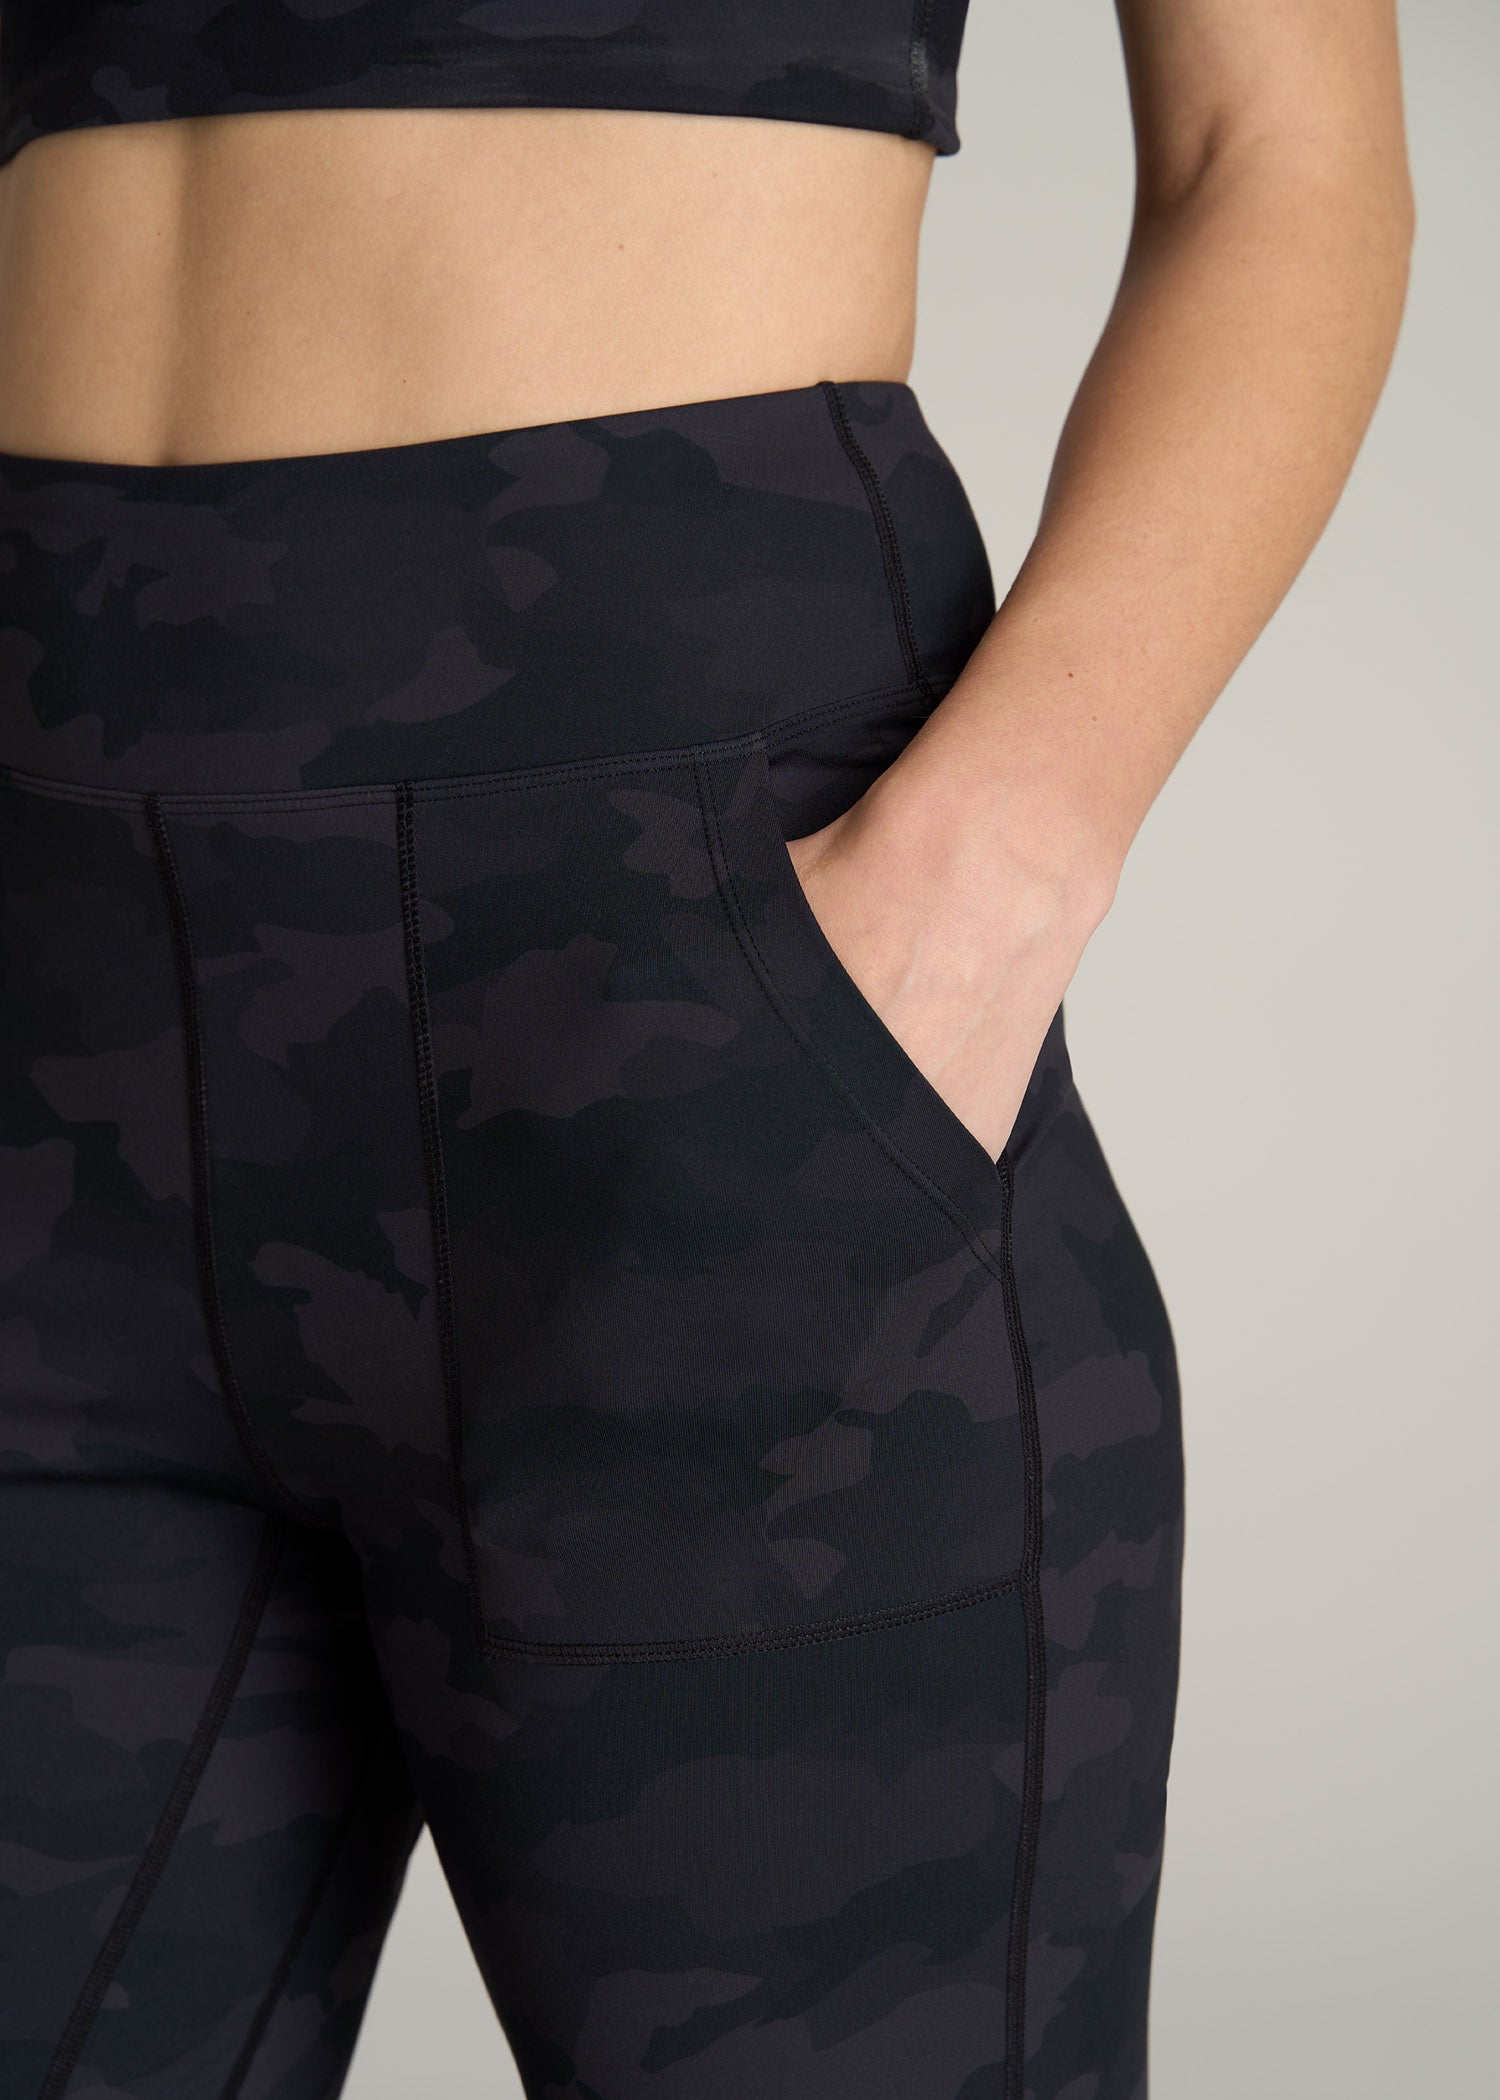 Balance Pocket Joggers for Tall Women in Grey Camo